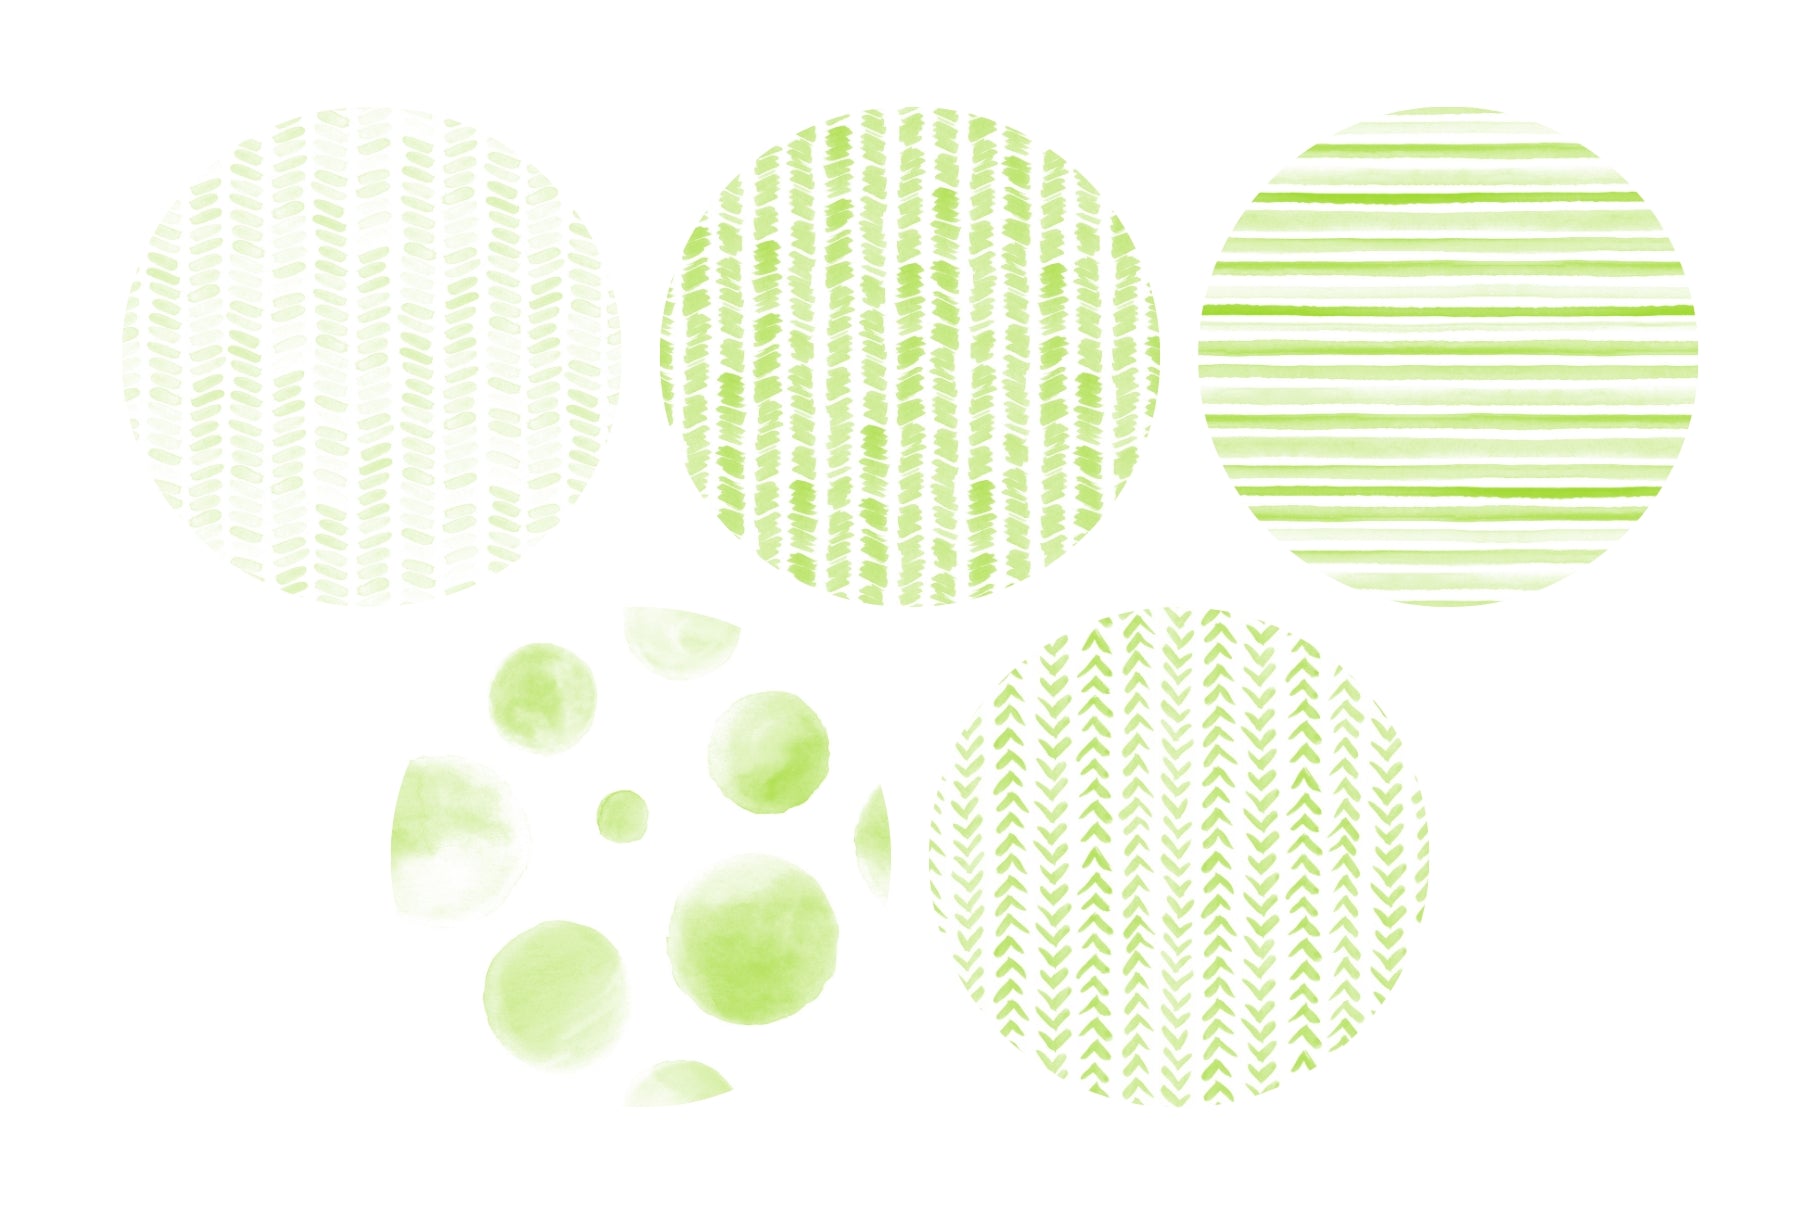 Watercolor Patterns 01 Green Watercolor Seamless Patterns